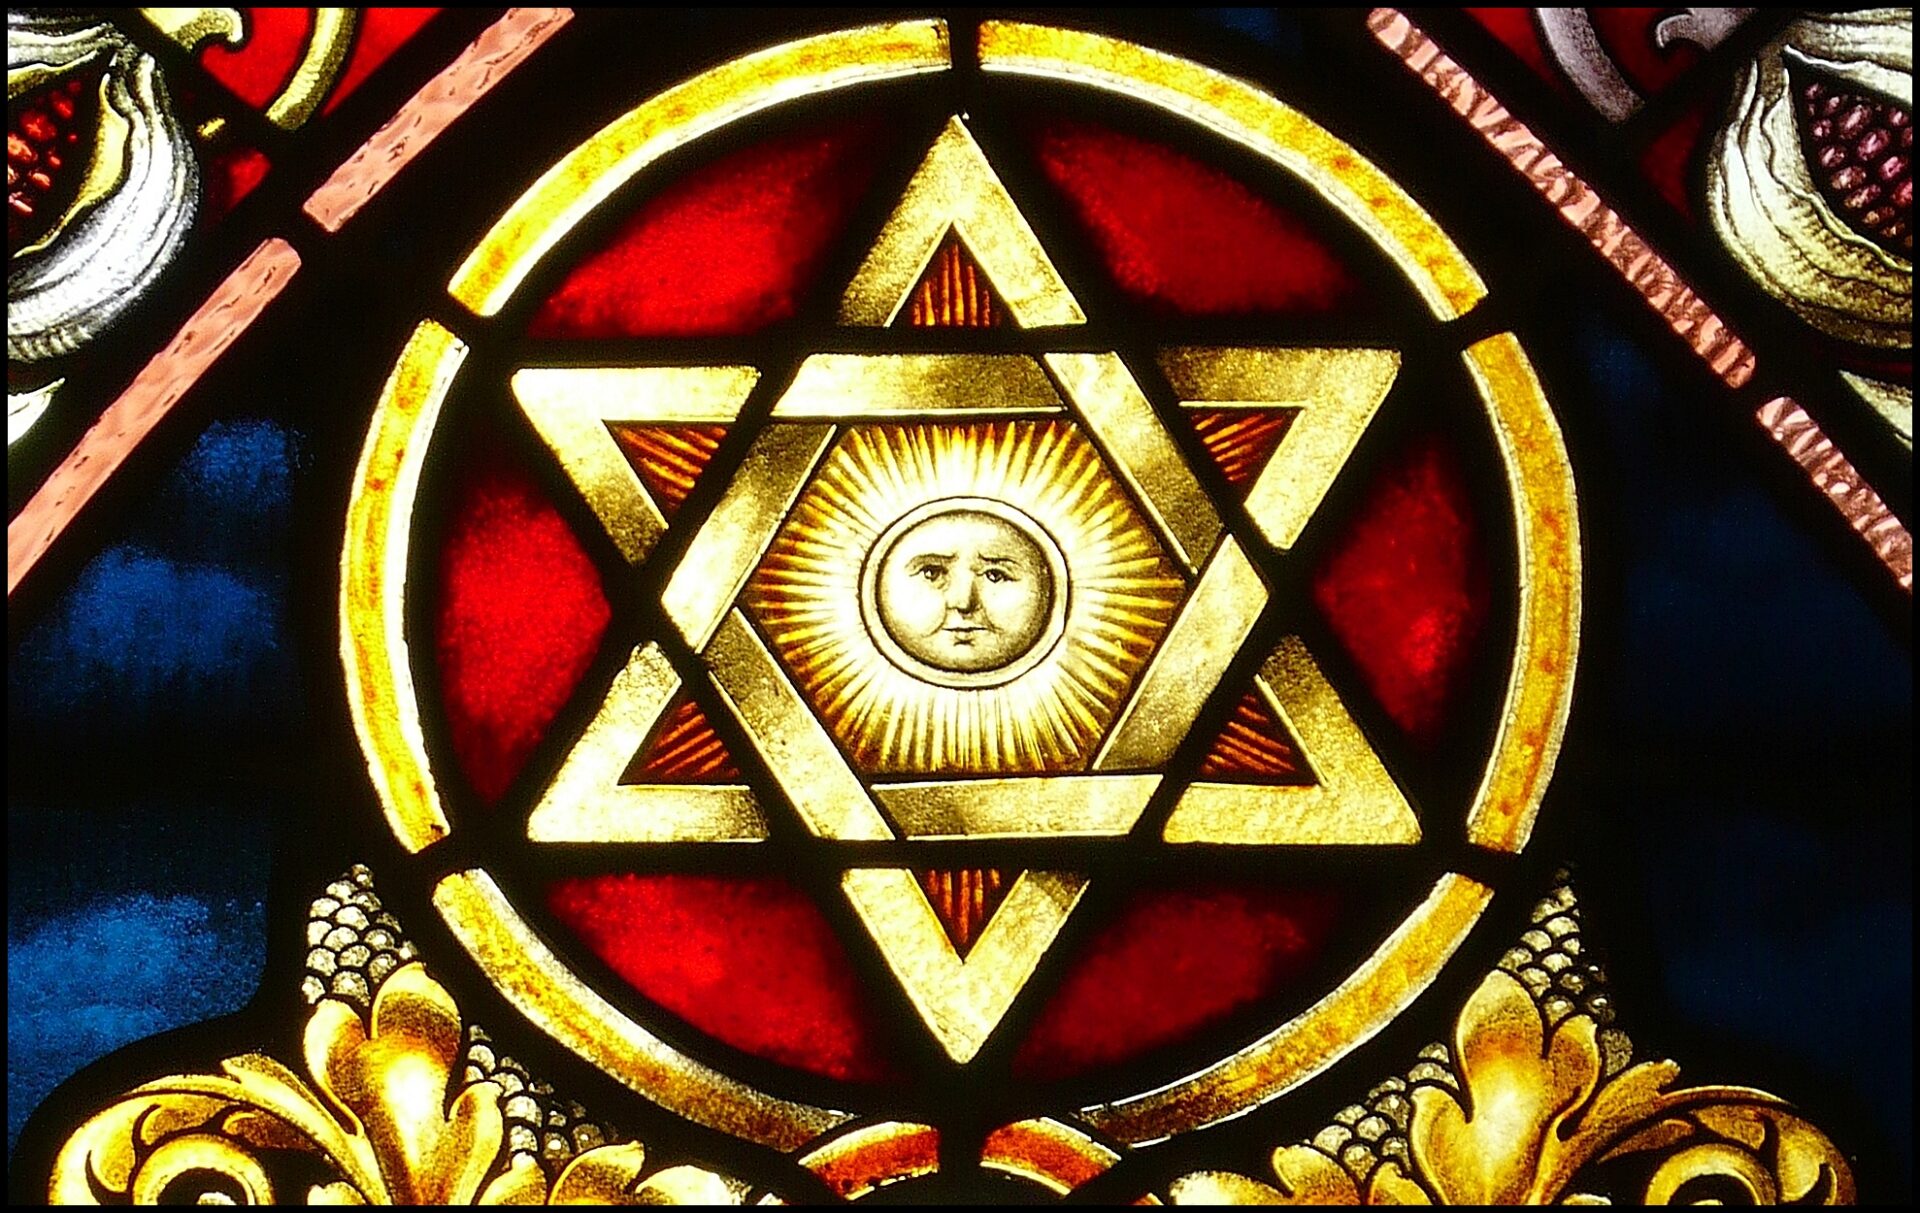 Secret Societies & Their Stained Glass